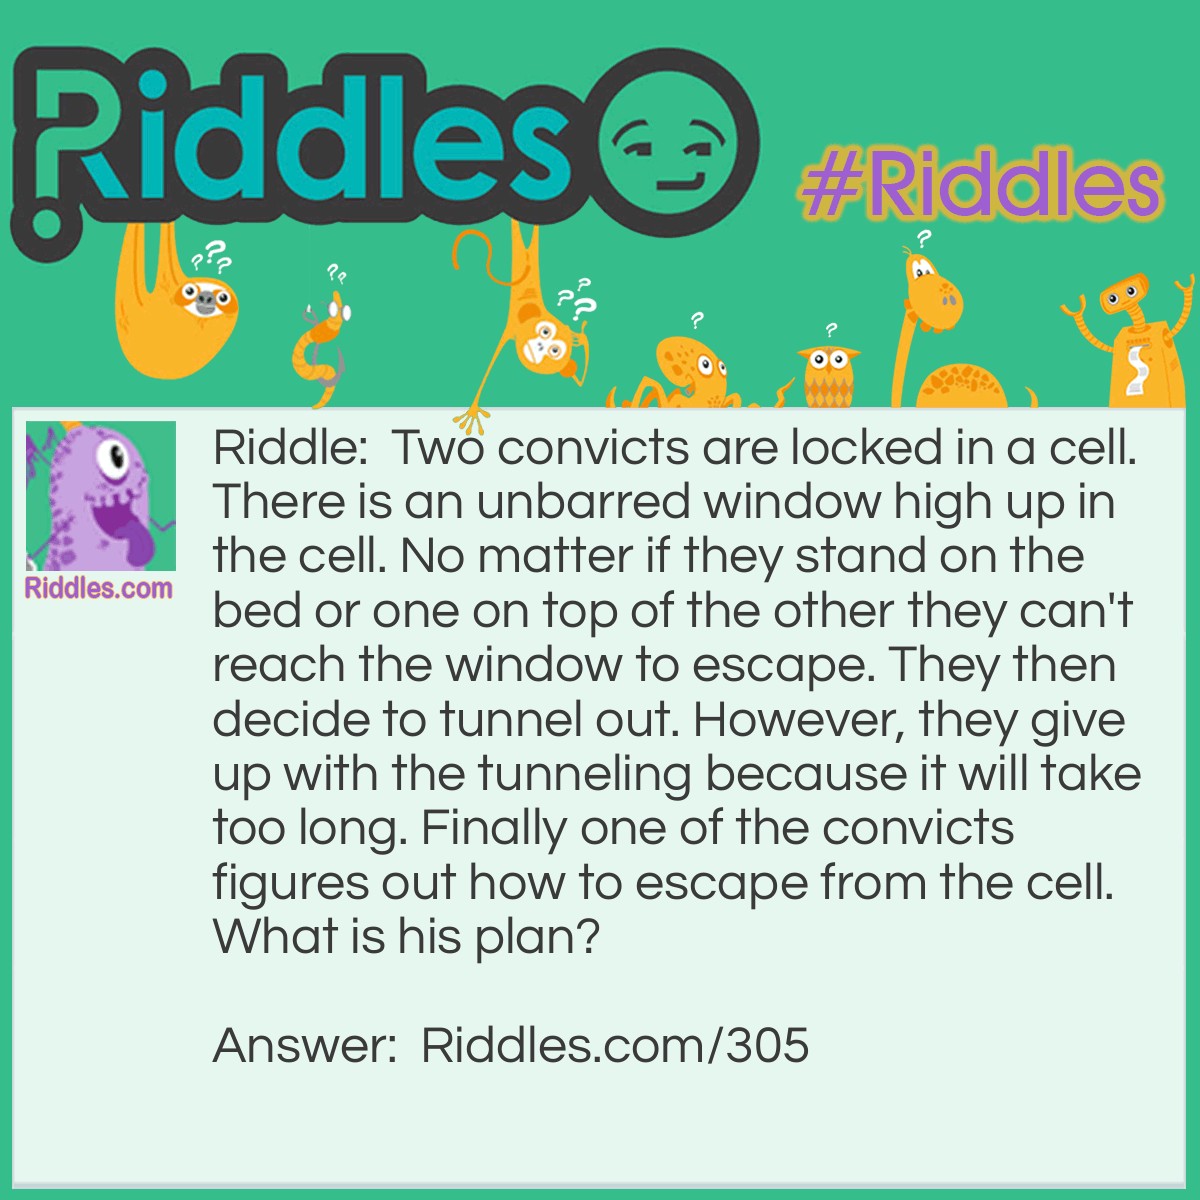 Riddle: Two convicts are locked in a cell. There is an unbarred window high up in the cell. No matter if they stand on the bed or one on top of the other they can't reach the window to escape. They then decide to tunnel out. However, they give up on the tunneling because it will take too long. Finally one of the convicts figures out how to escape from the cell. What is his plan? Answer: His plan is to dig the tunnel and pile up the dirt to climb up to the window to escape.